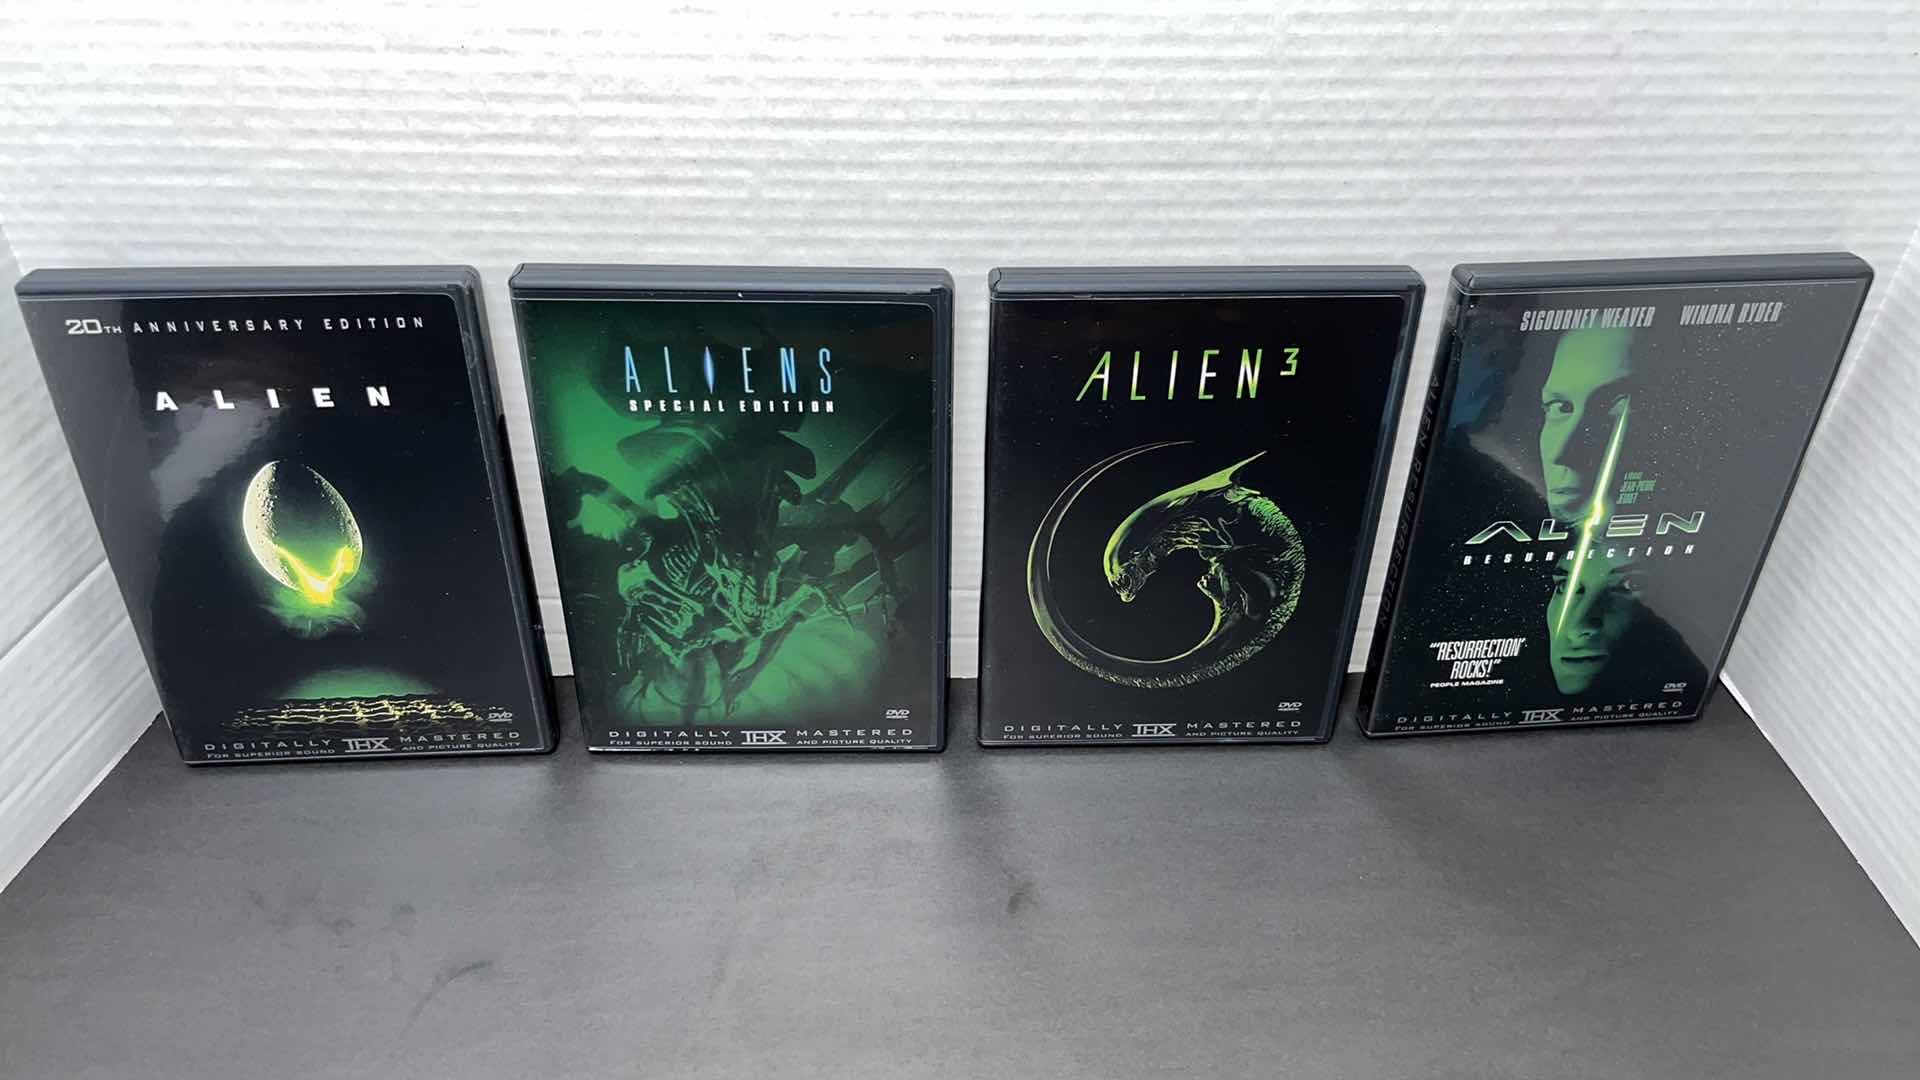 Photo 4 of THE ALIEN LEGACY 20TH ANNIVERSARY EDITION 4 DISC DVD SET, 1993 RELEASE 